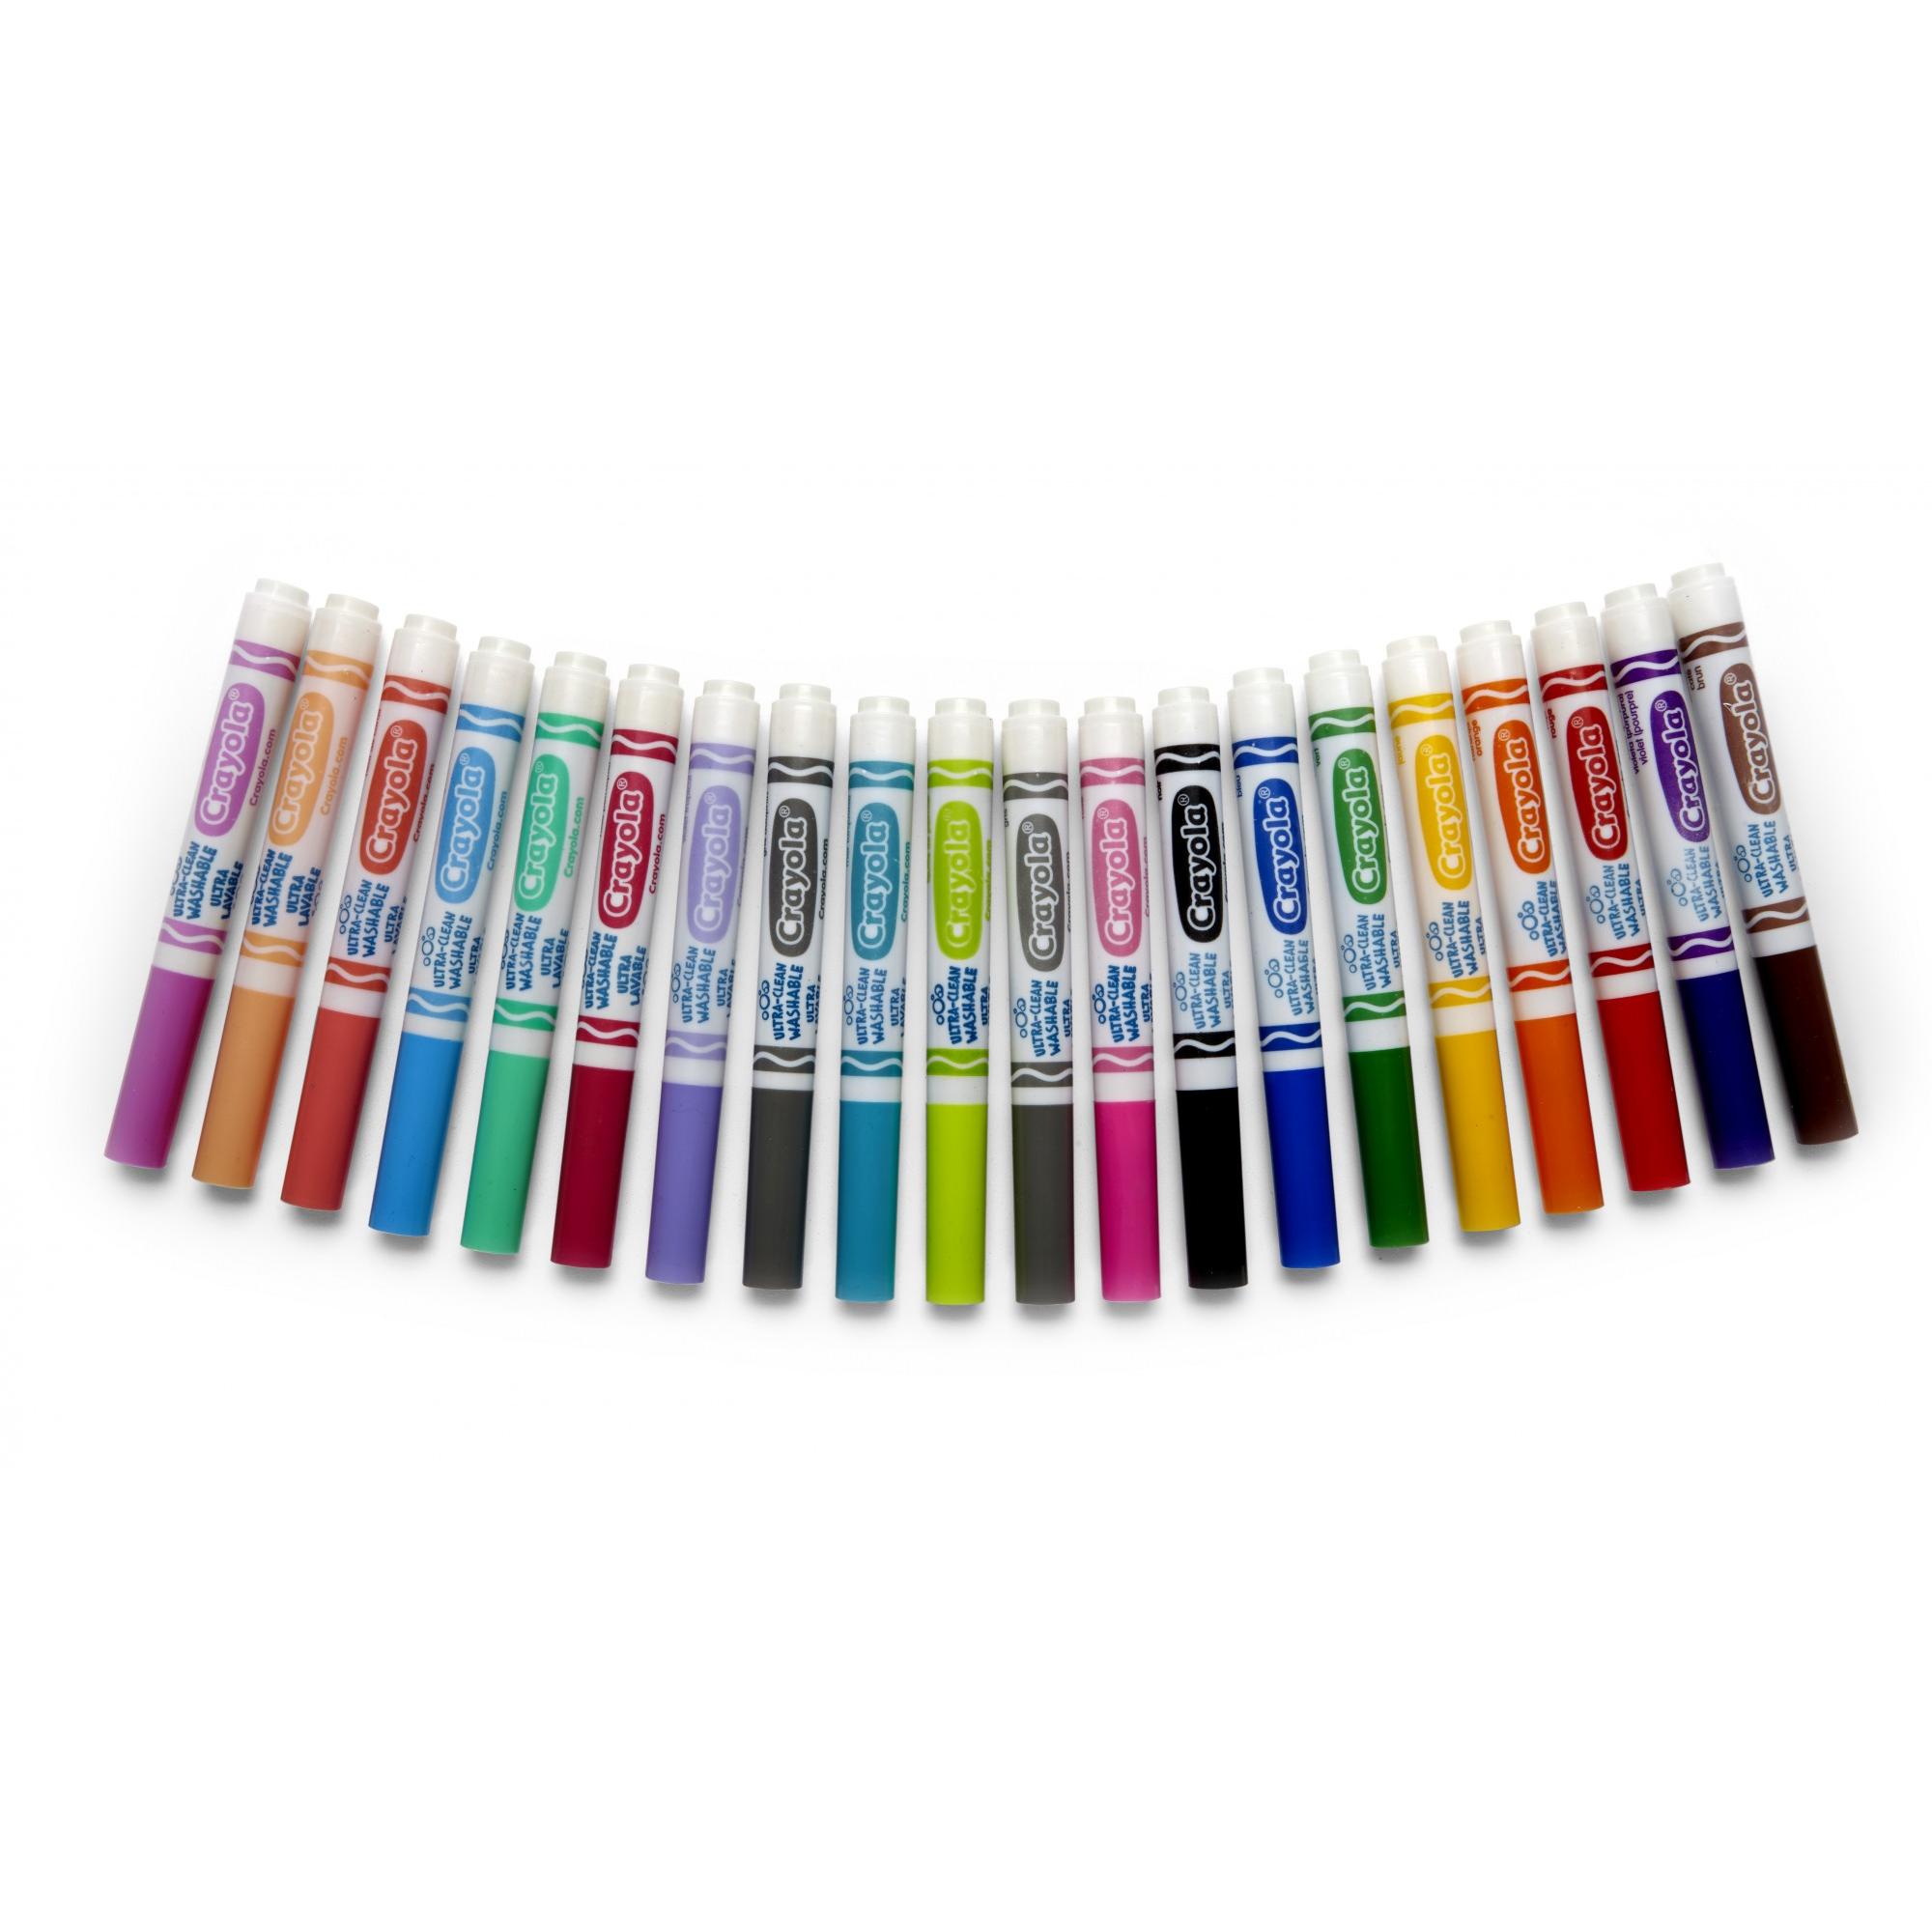 Crayola Ultra-Clean Washable Broad Line Markers, Back to School Supplies, 20 Ct, Classic Colors - image 5 of 8